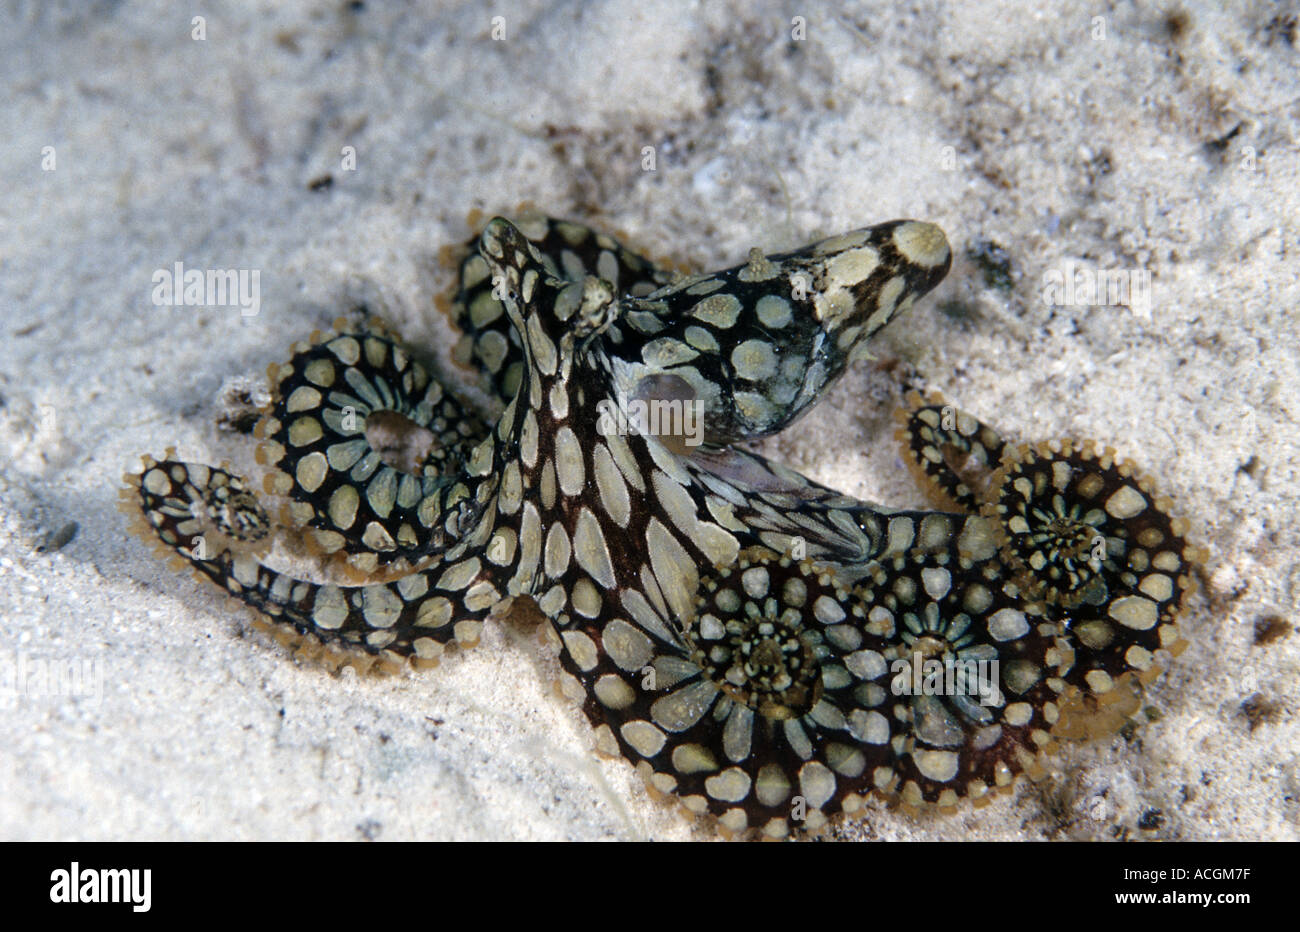 A rare mosaic octopus displaying its incredible patterns after being disturbed Stock Photo